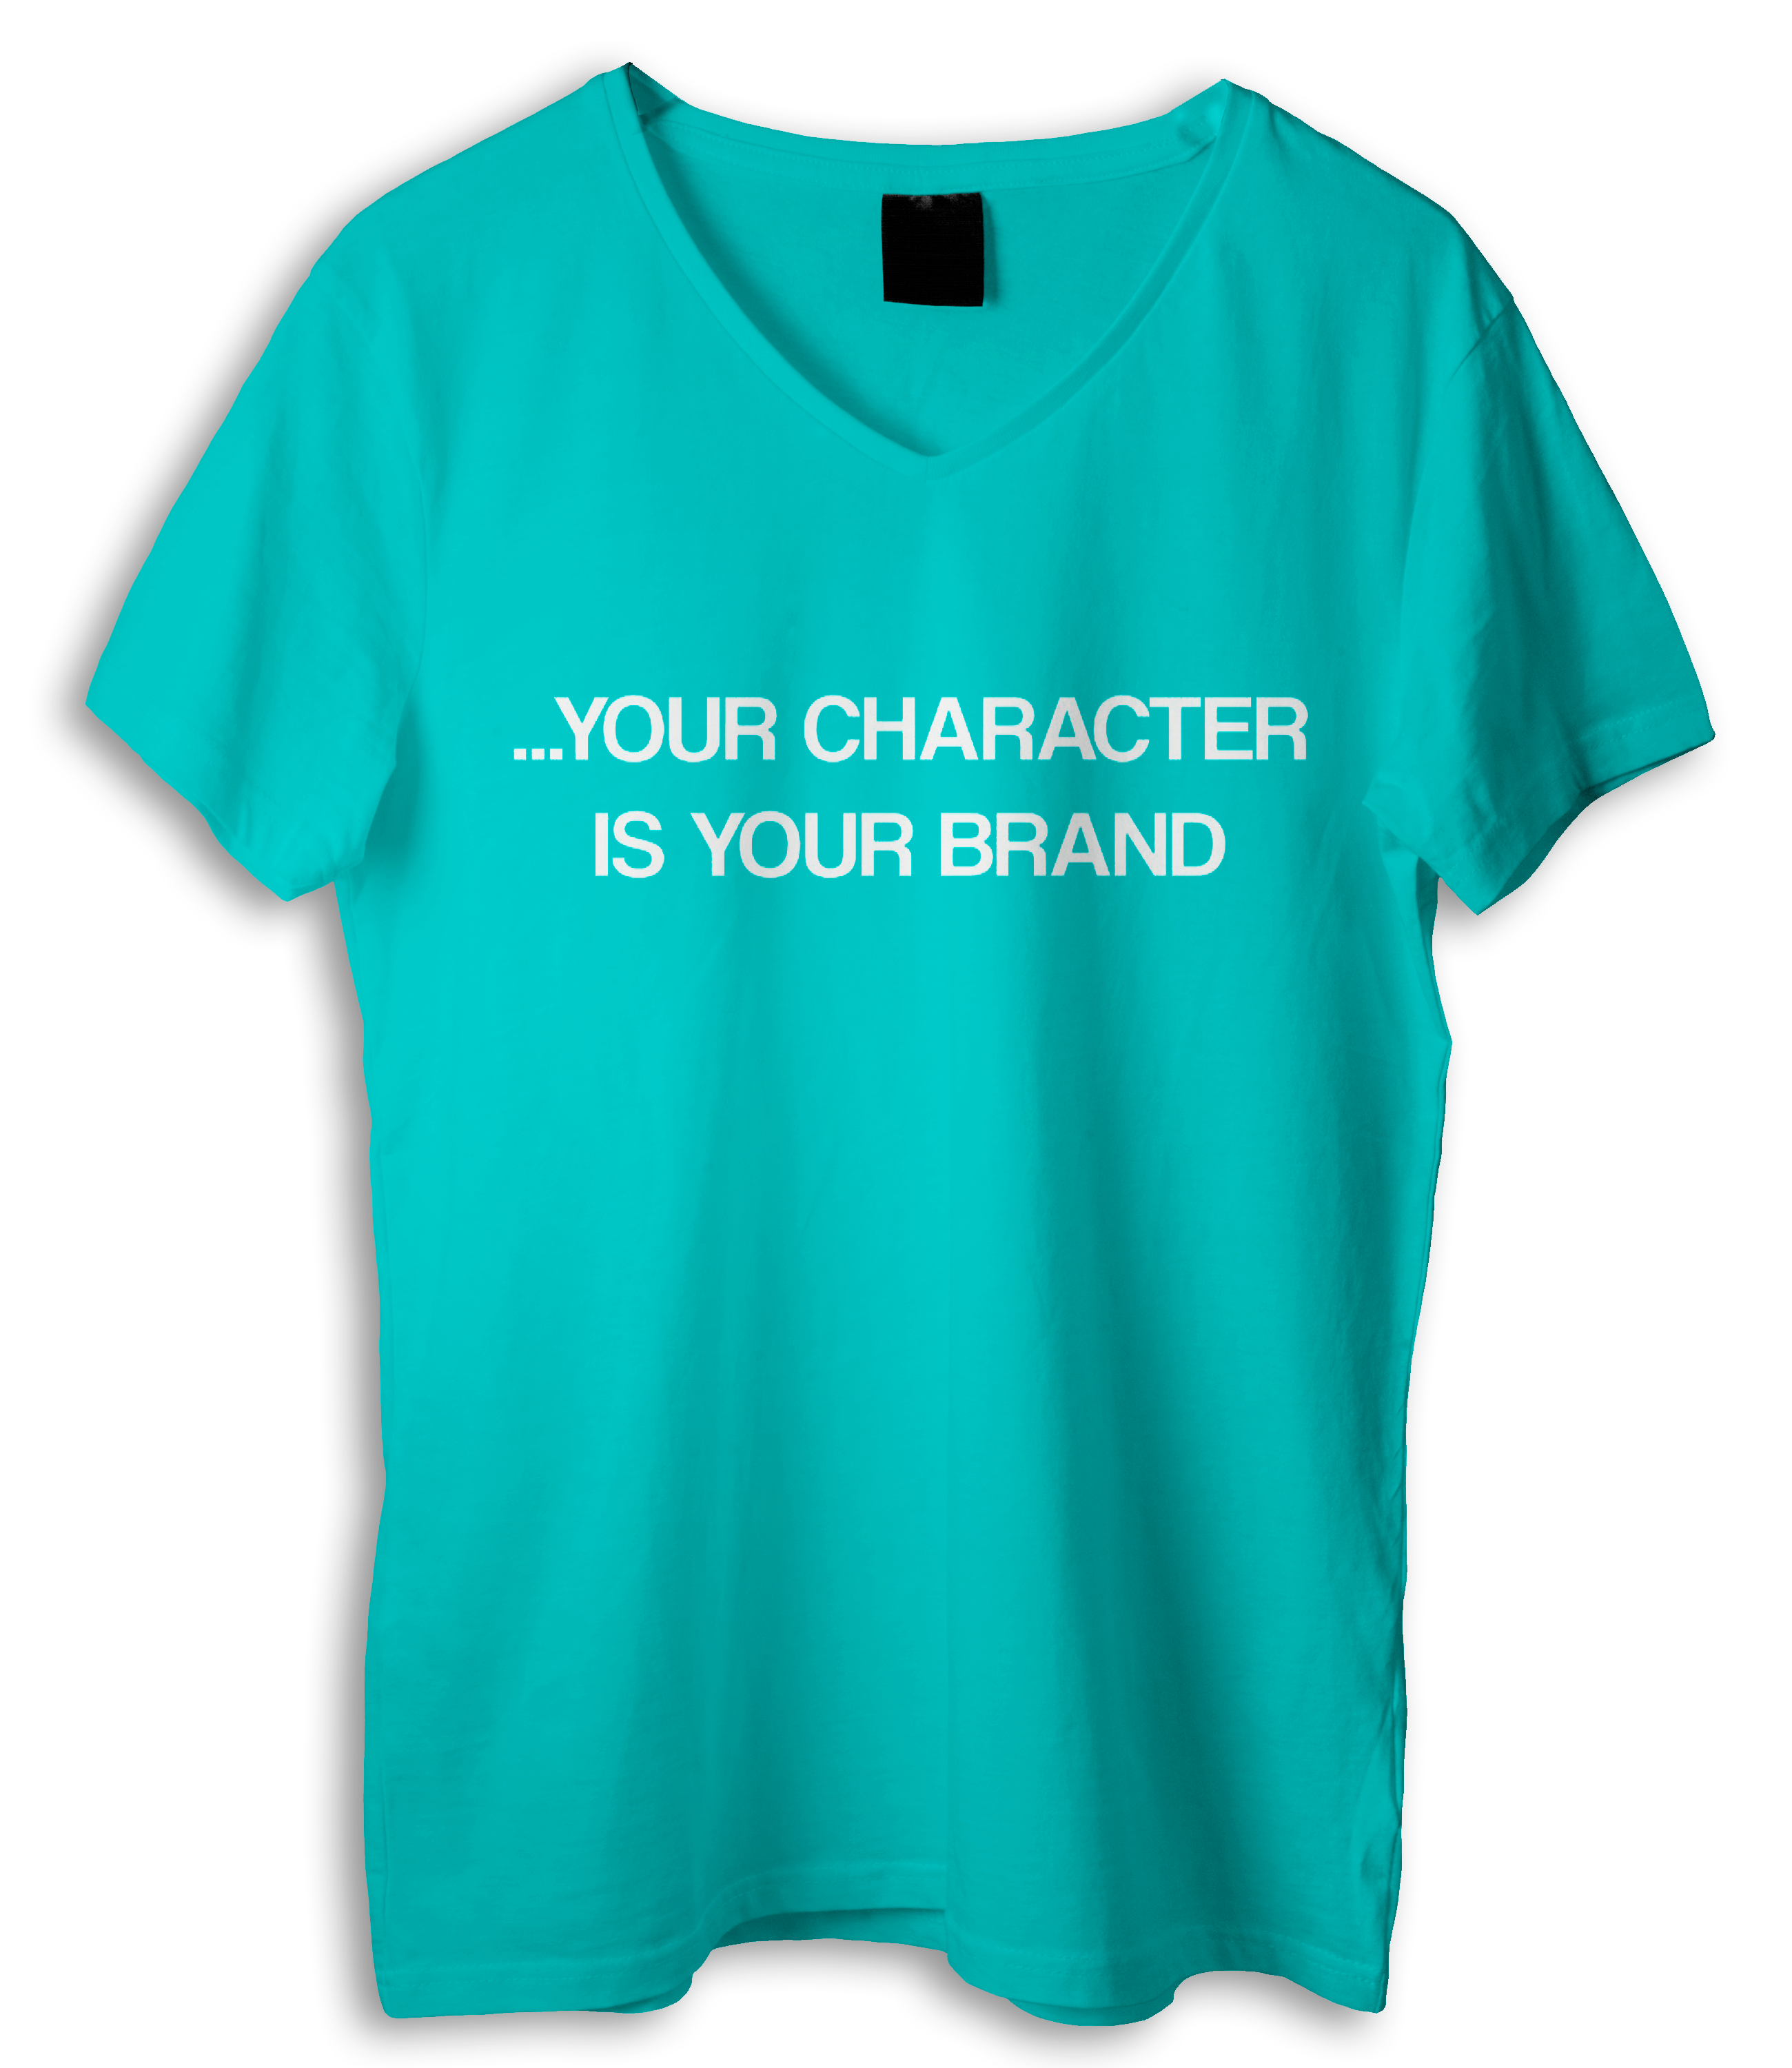 Your Character is Your Brand Turquoise Shirt